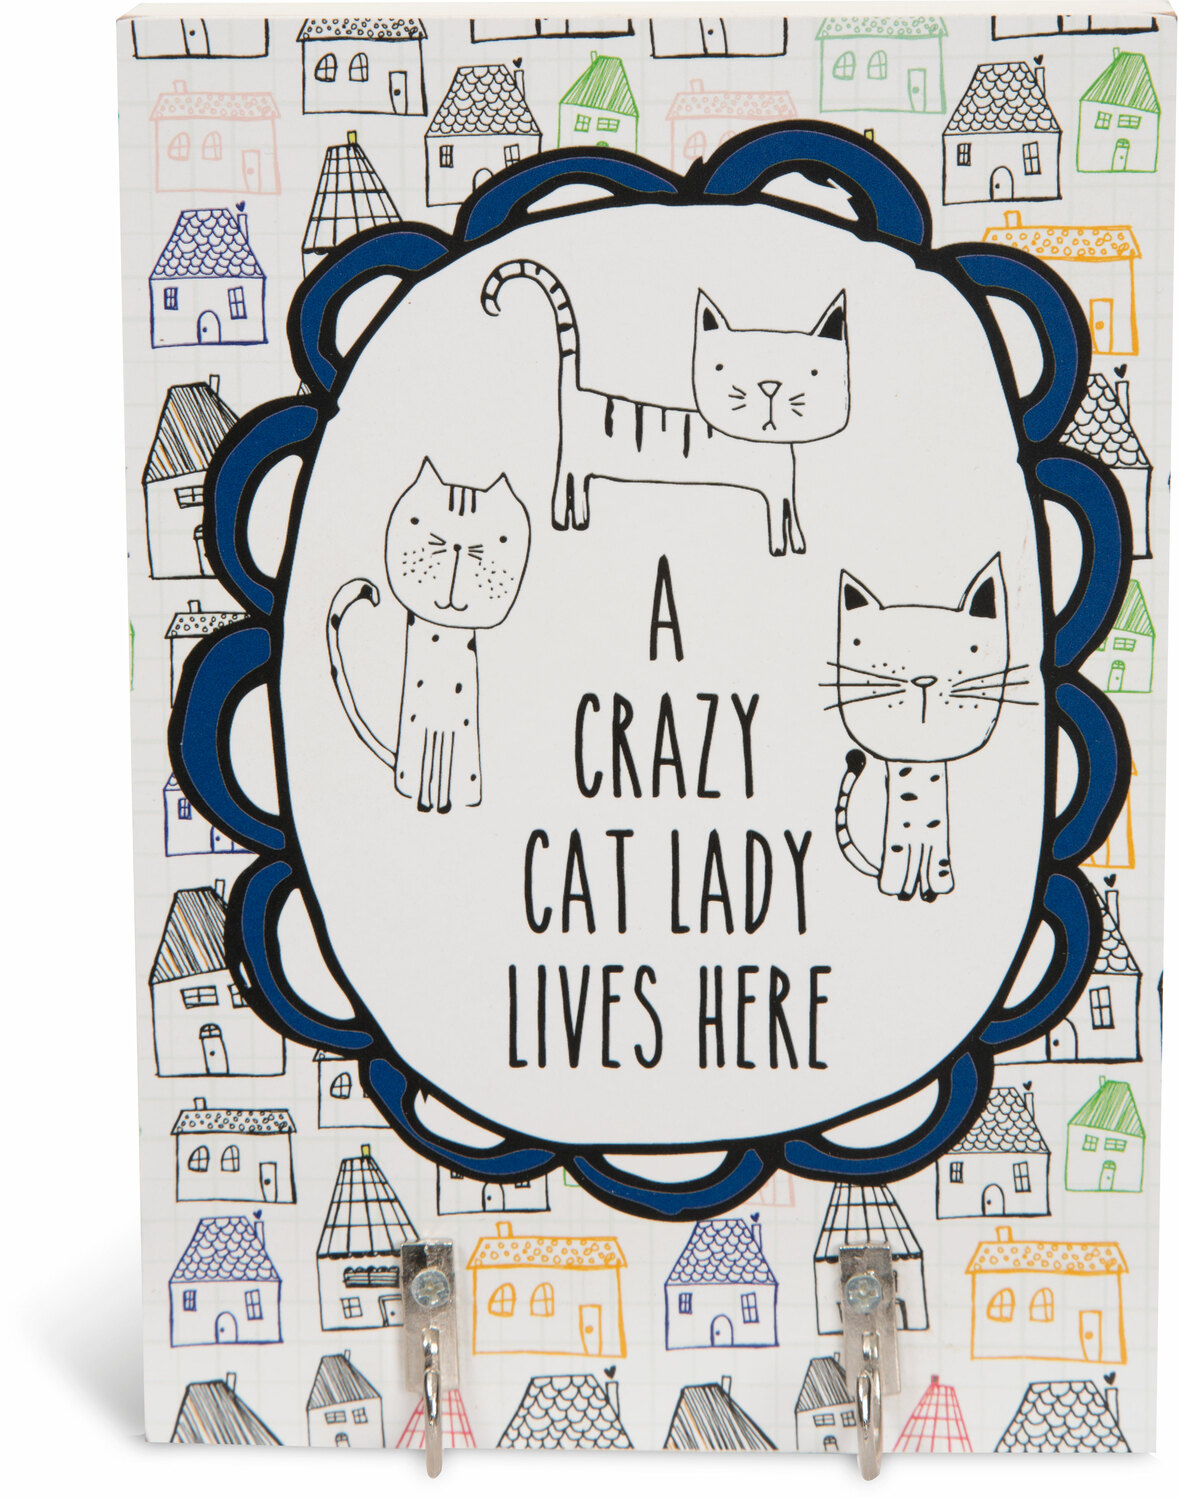 Crazy Cat Lady by It's Cats and Dogs - Crazy Cat Lady - 5" x 7" Wall Hooks